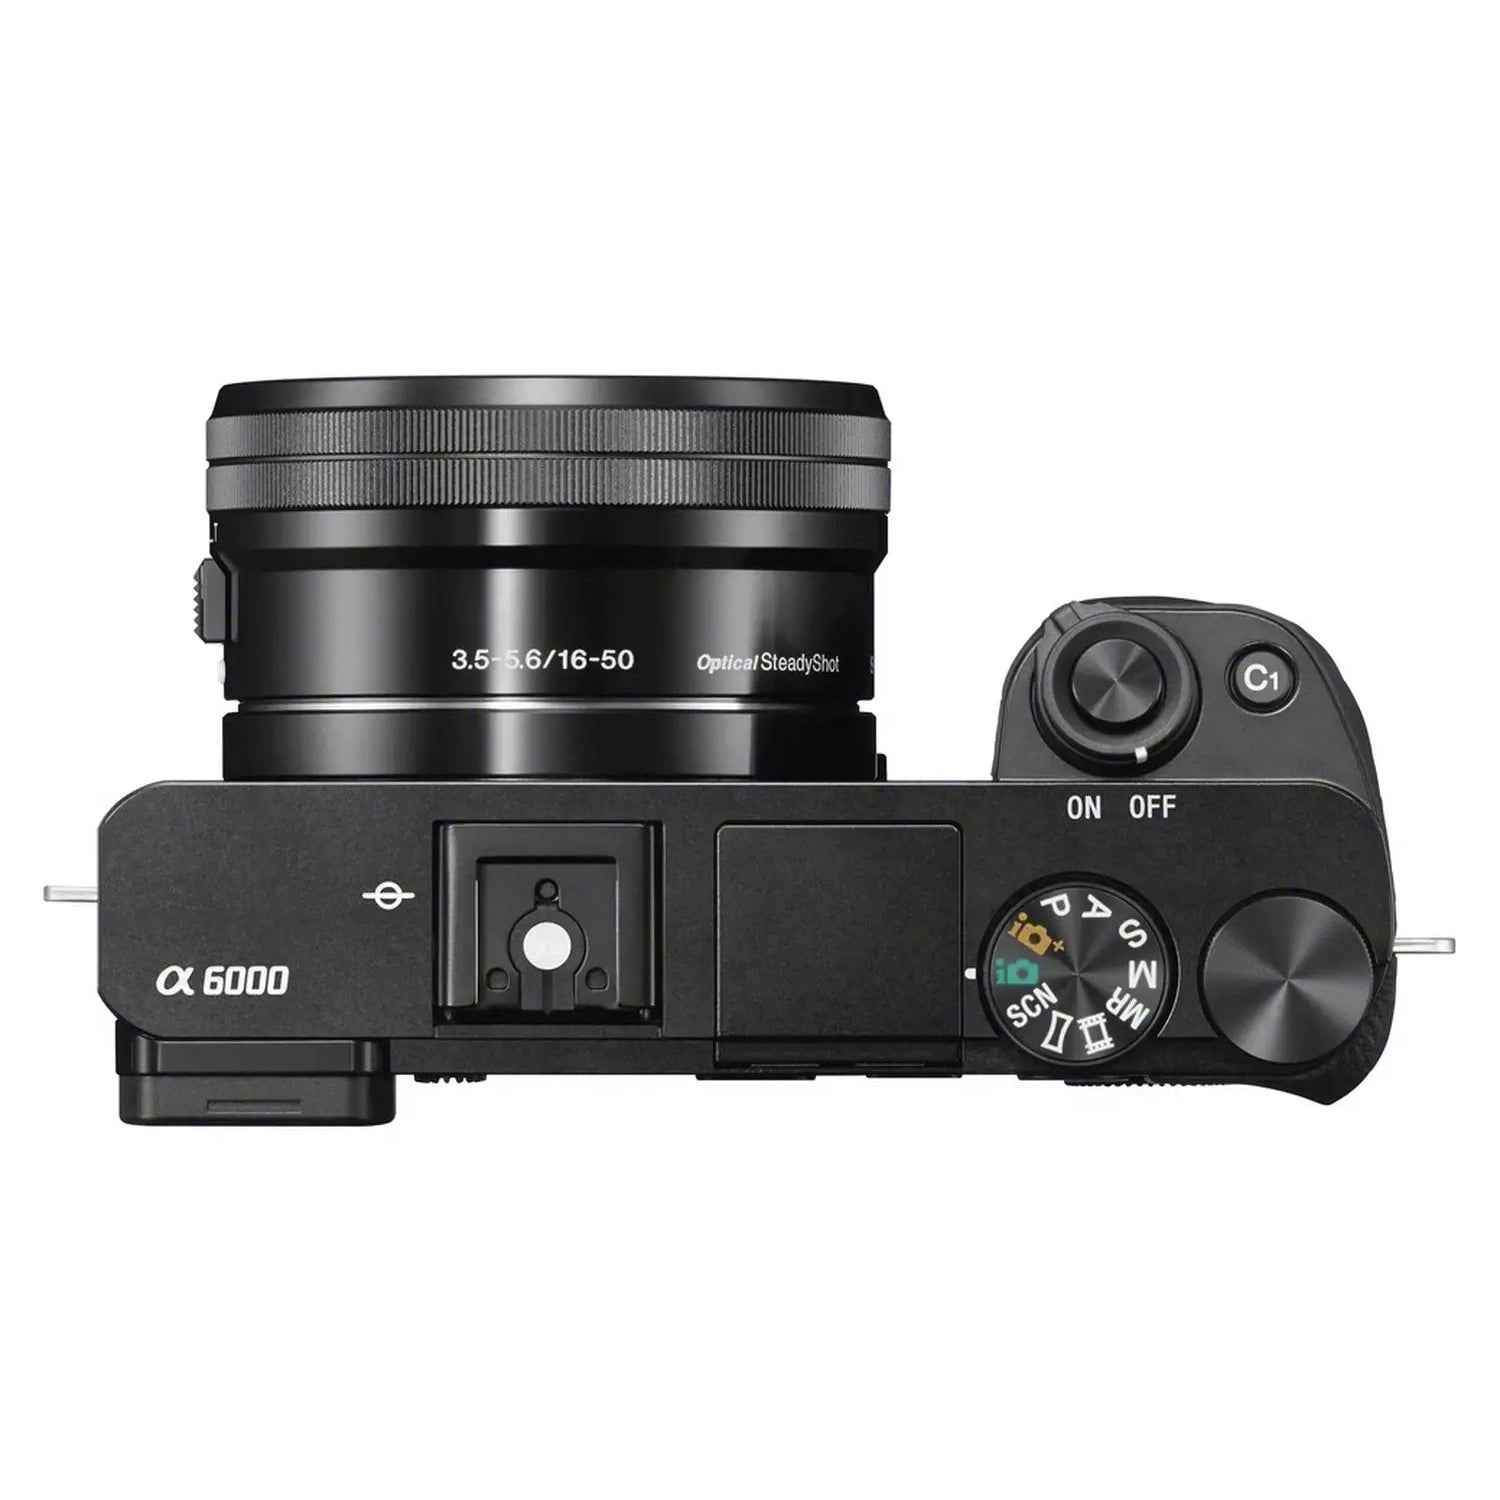 Sony A6000 Mirrorless Camera With 16-50mm Lens, Black - Refurbished Good